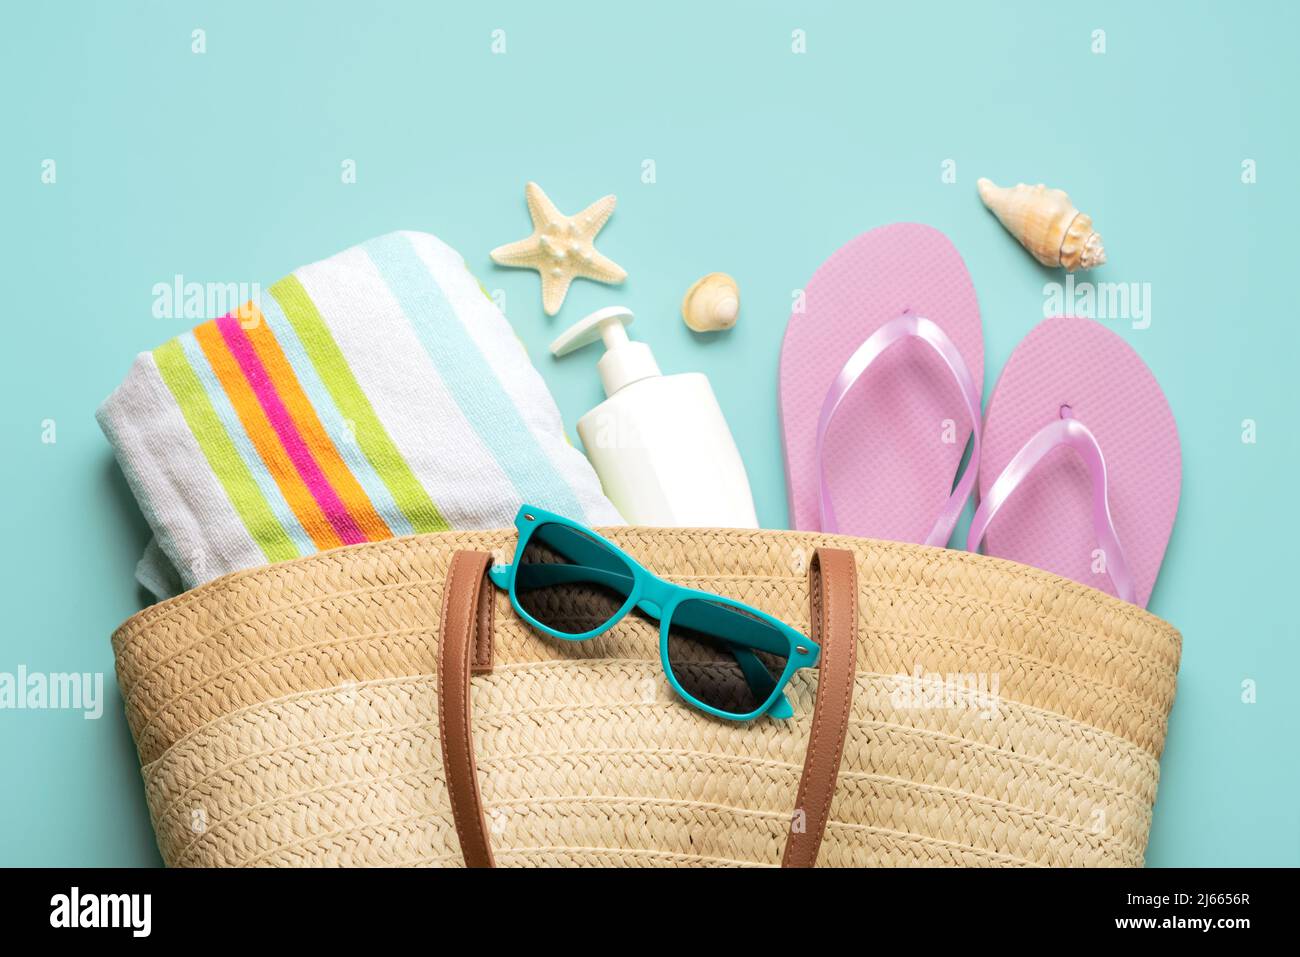 Summer holiday concept.Top view of beach bag with flip flops,beach towel,sunglasses,sea shells and starfish over blue background. Stock Photo